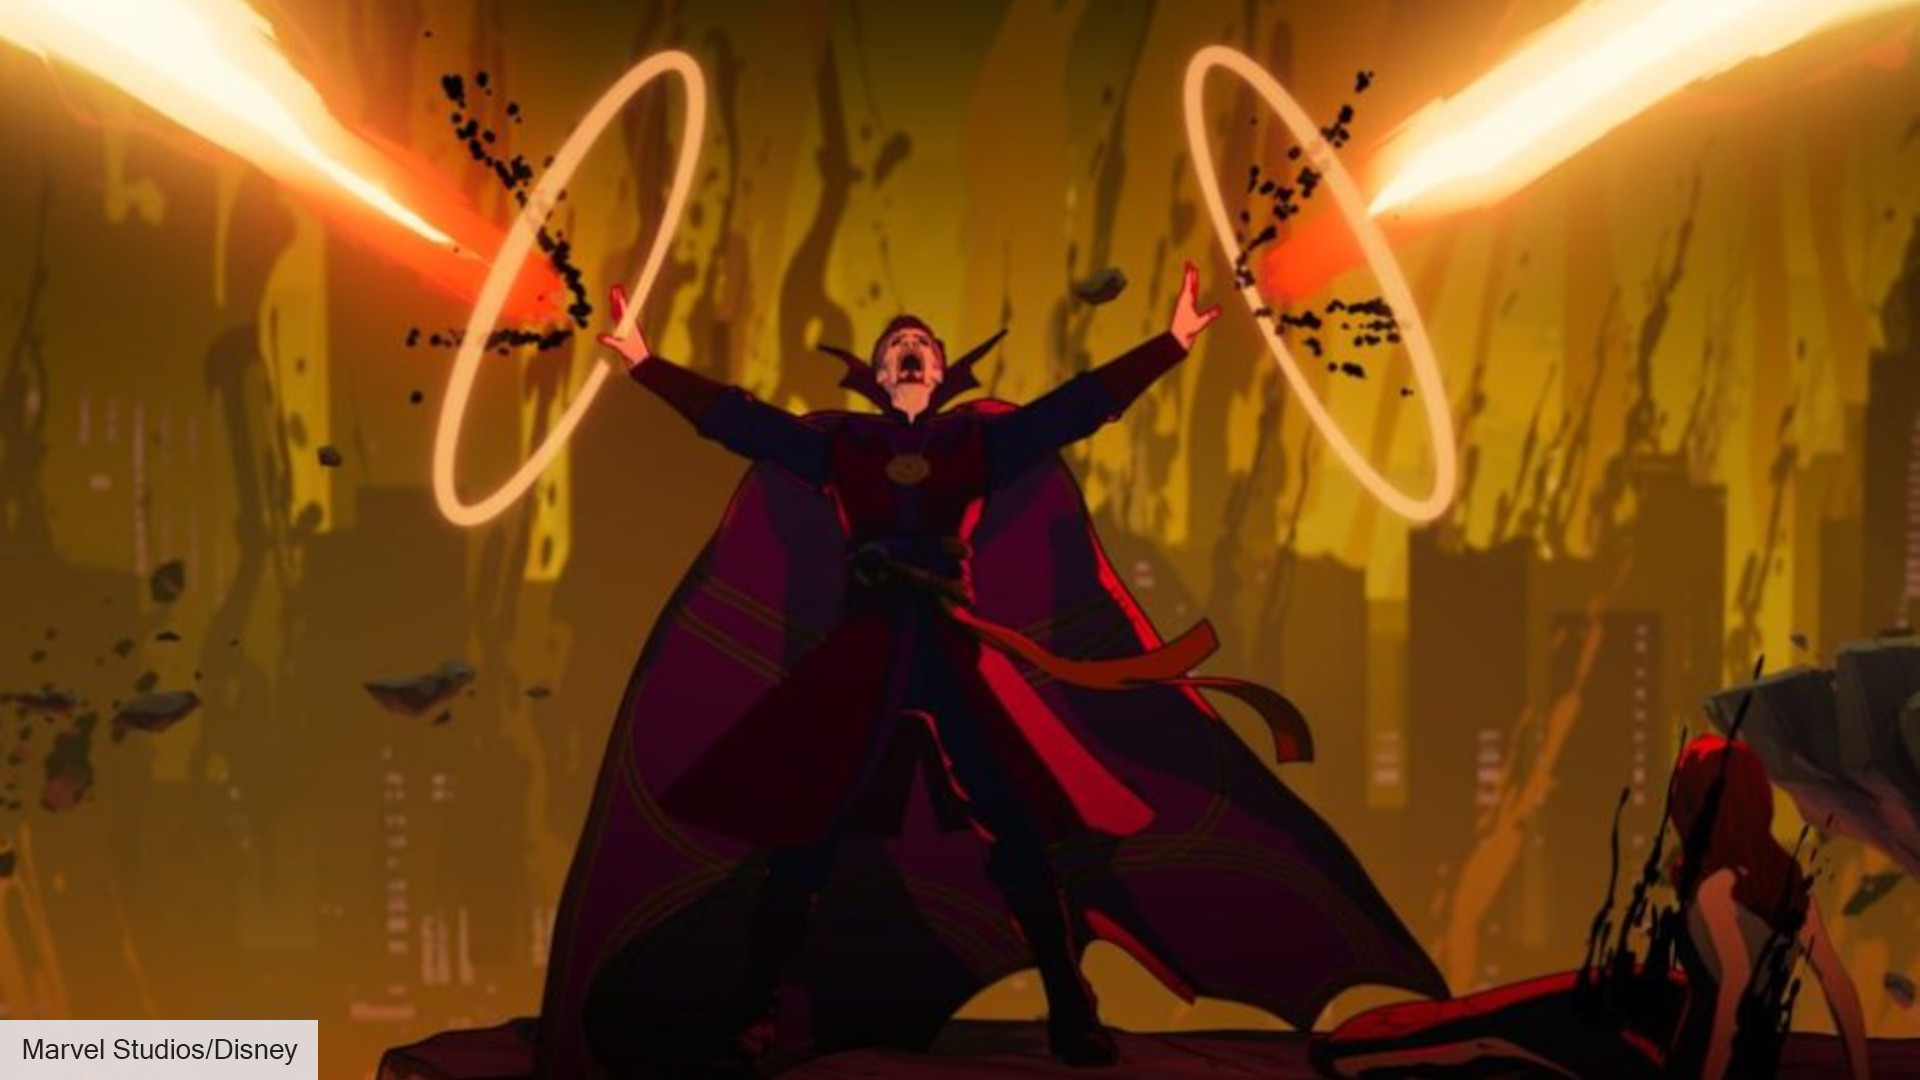 If you like What If?'s evil Doctor Strange, you should watch Batman's 'Heart of Ice'. The Digital Fix